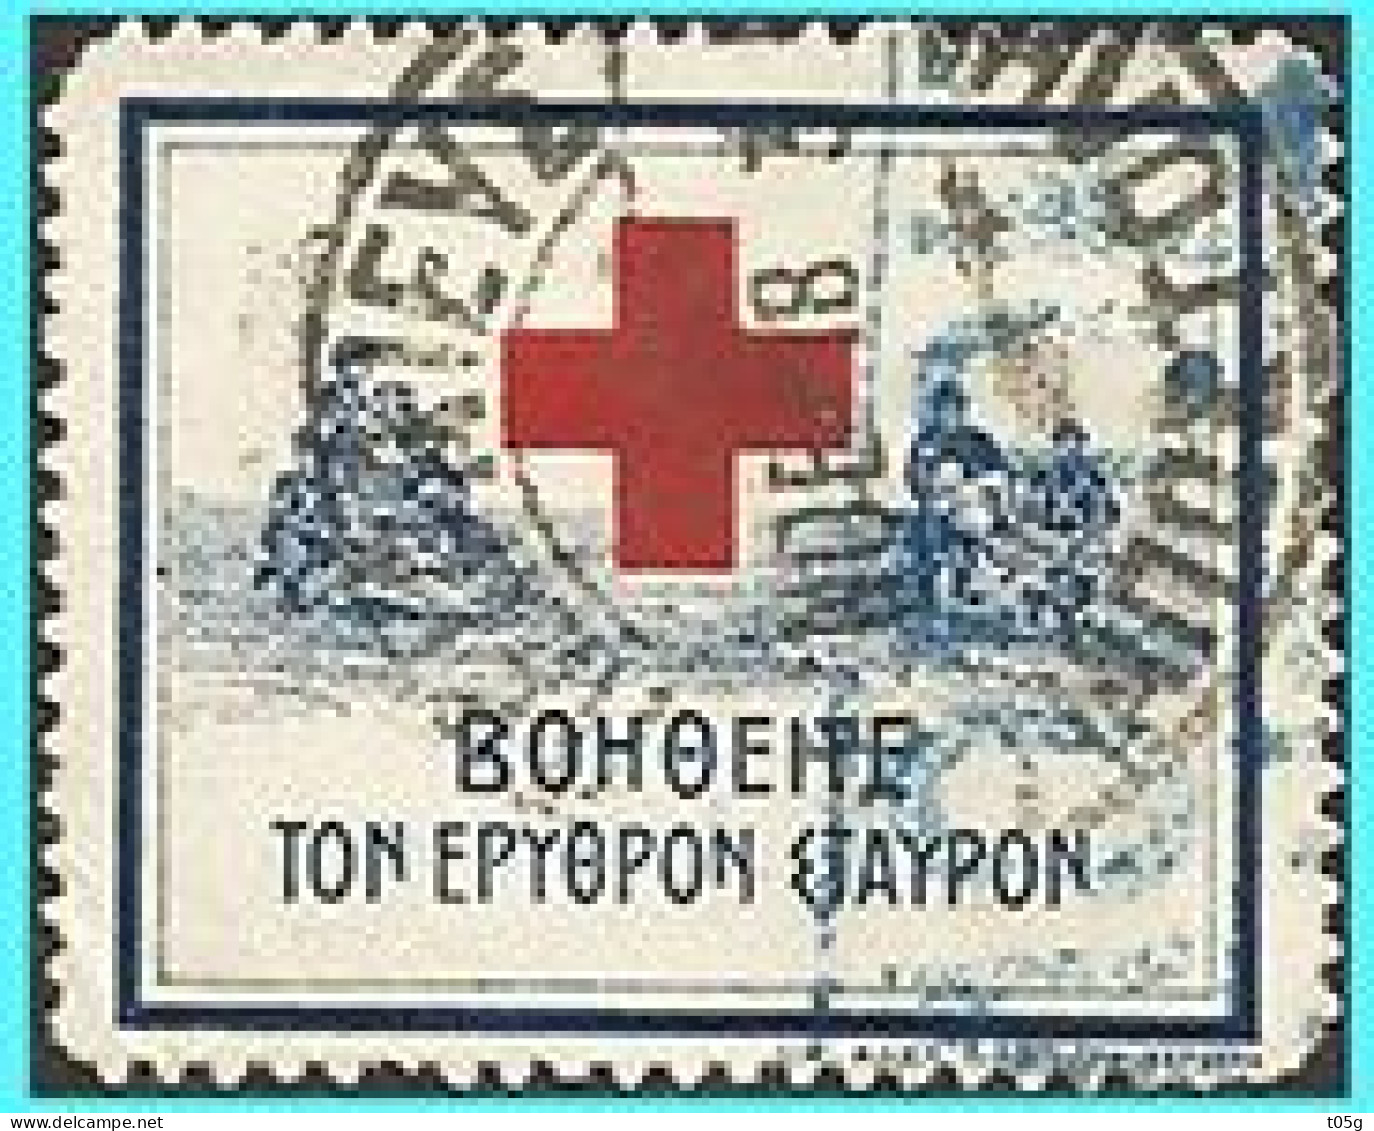 GREECE- GRECE - HELLAS CHARITY STAMPS 1915 : "Red Cross"  Set Used - Usados